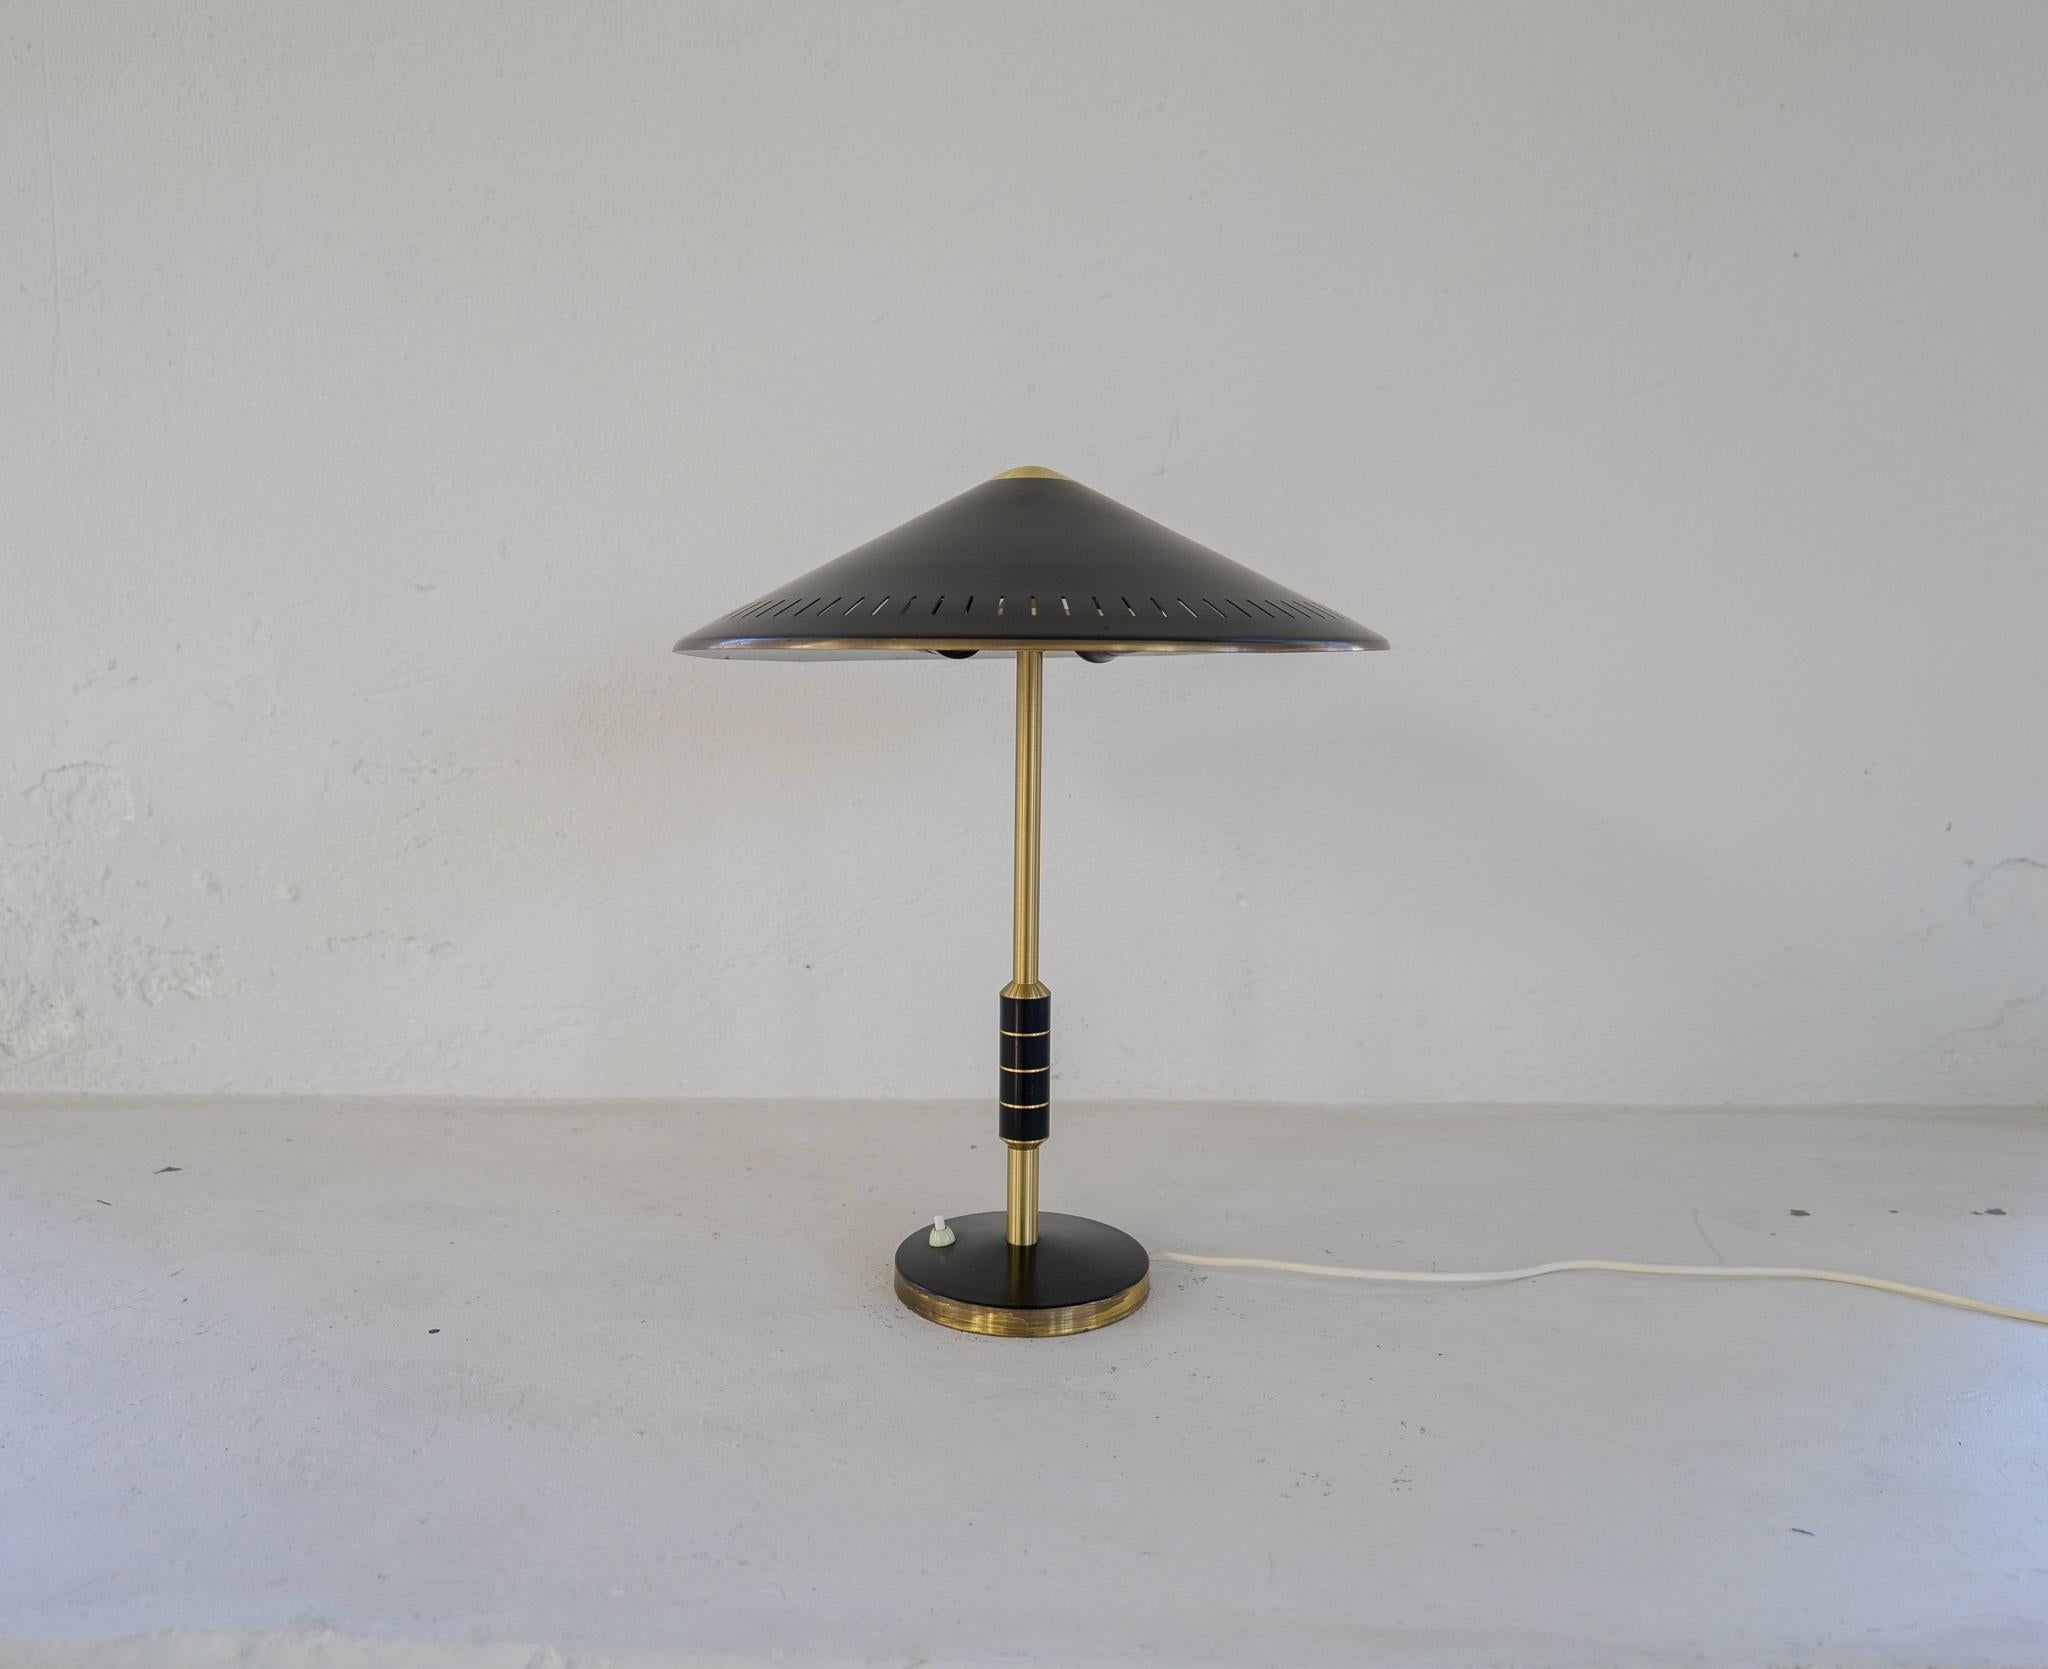 Midcentury Modern Table Lamp by Bent Karlby Produced by Lyfa in Denmark, 1956 In Good Condition For Sale In Hillringsberg, SE